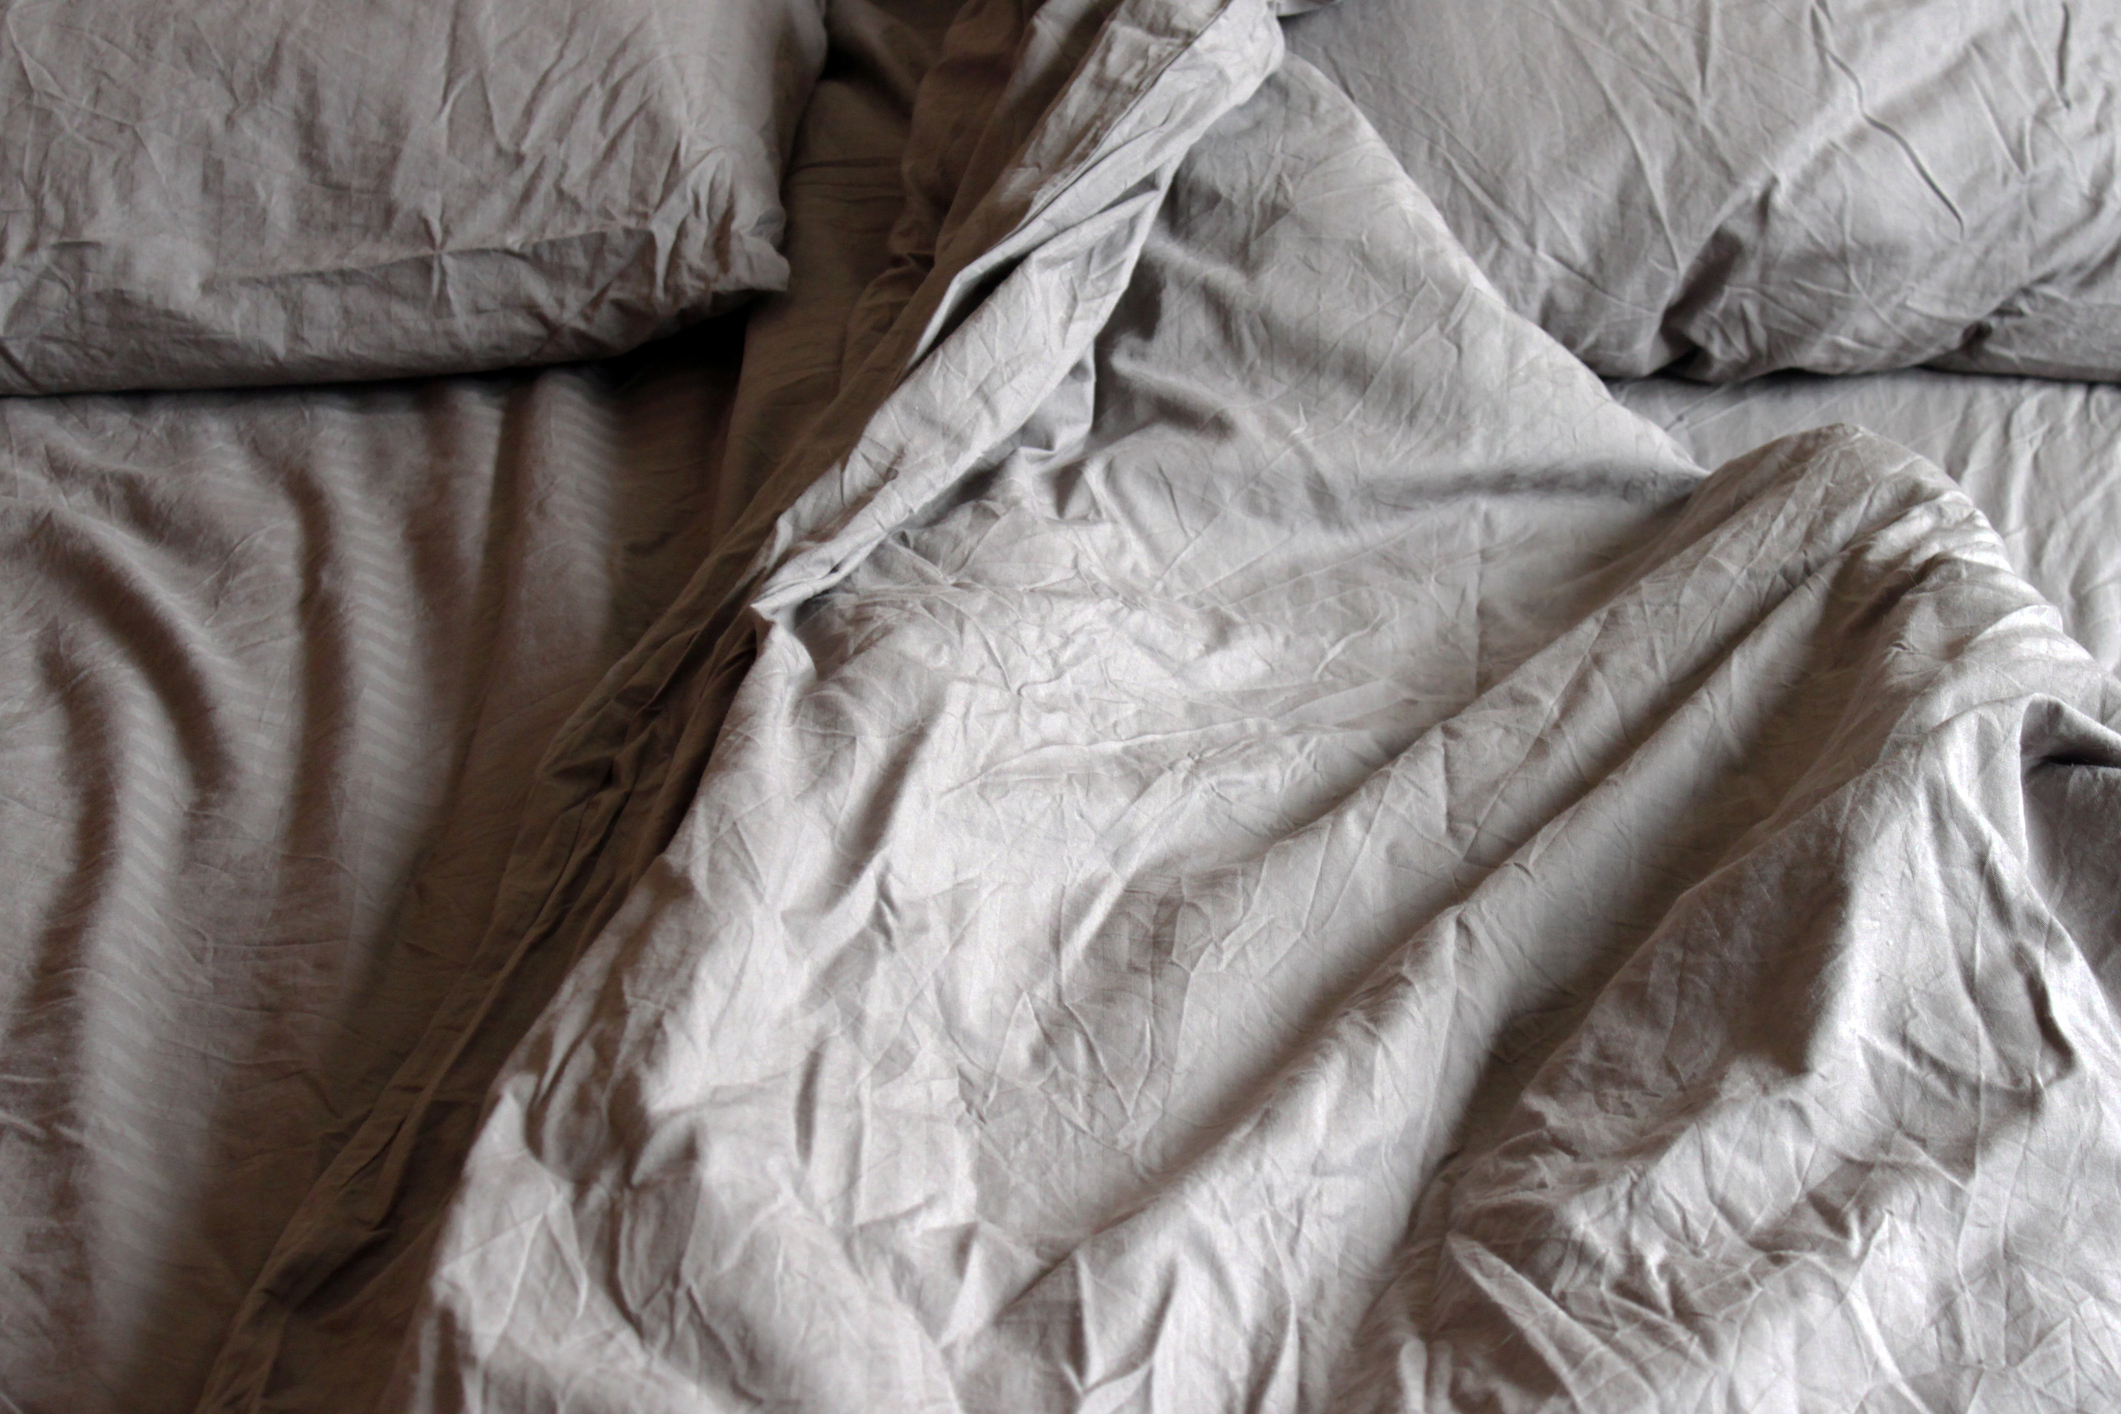 Unmade bed with crumpled sheets and pillows, suggestive of recent use